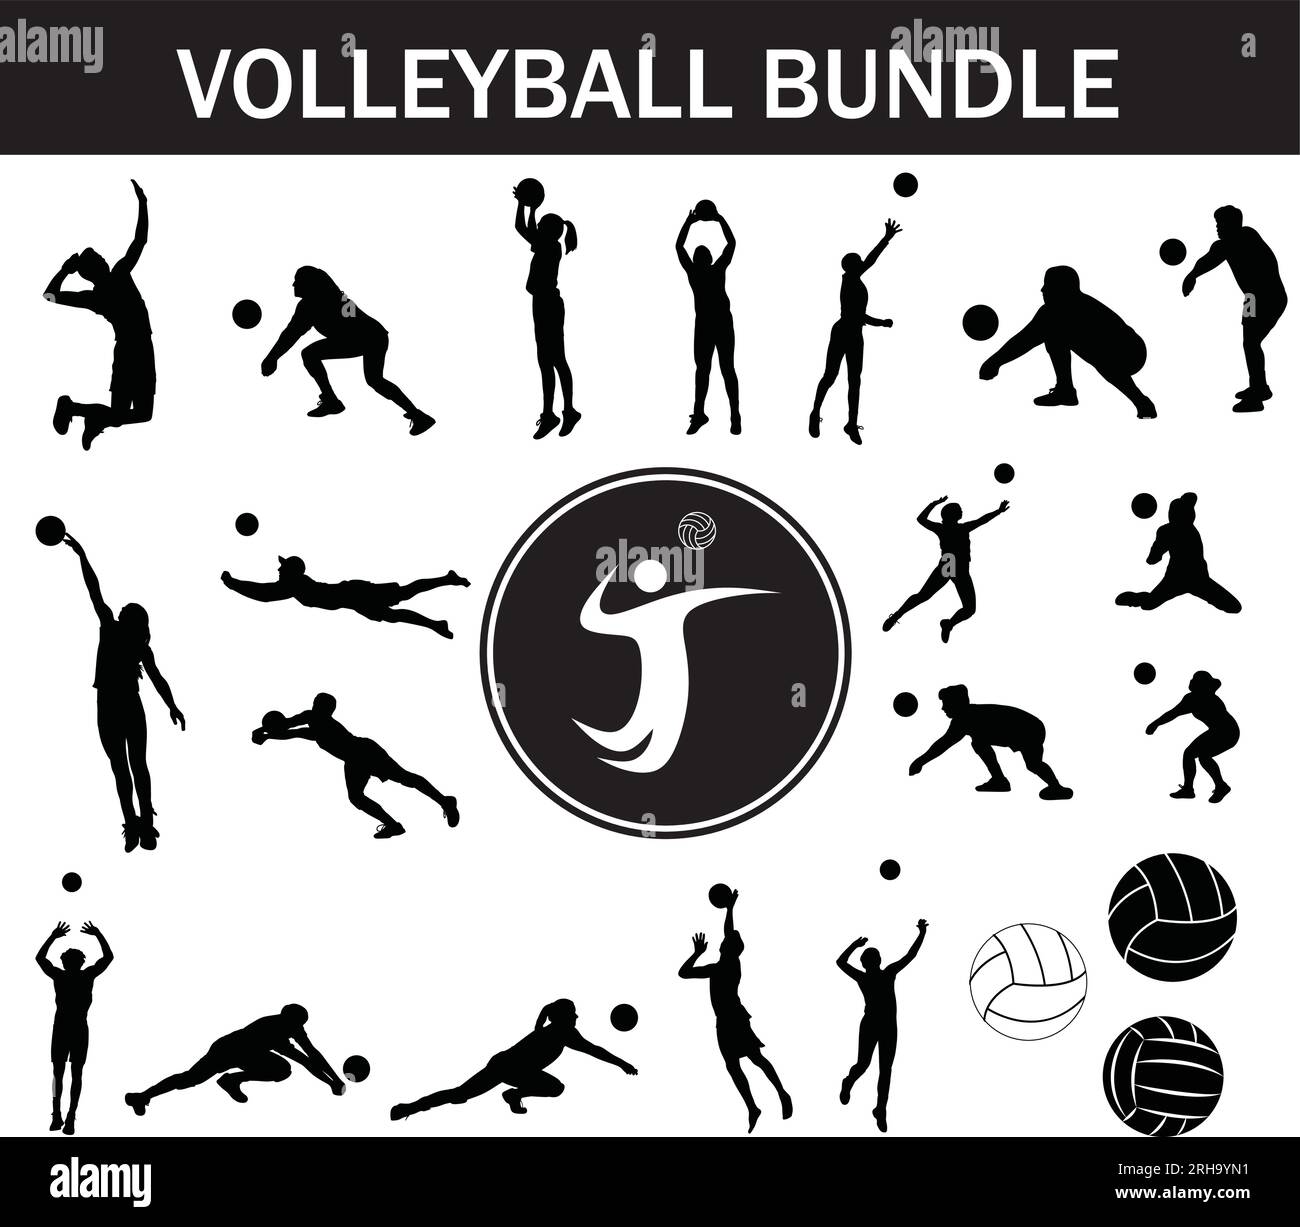 Volleyball Silhouette Bundle | Collection of Volleyball Players with Logo and Volleyball Equipment Stock Vector